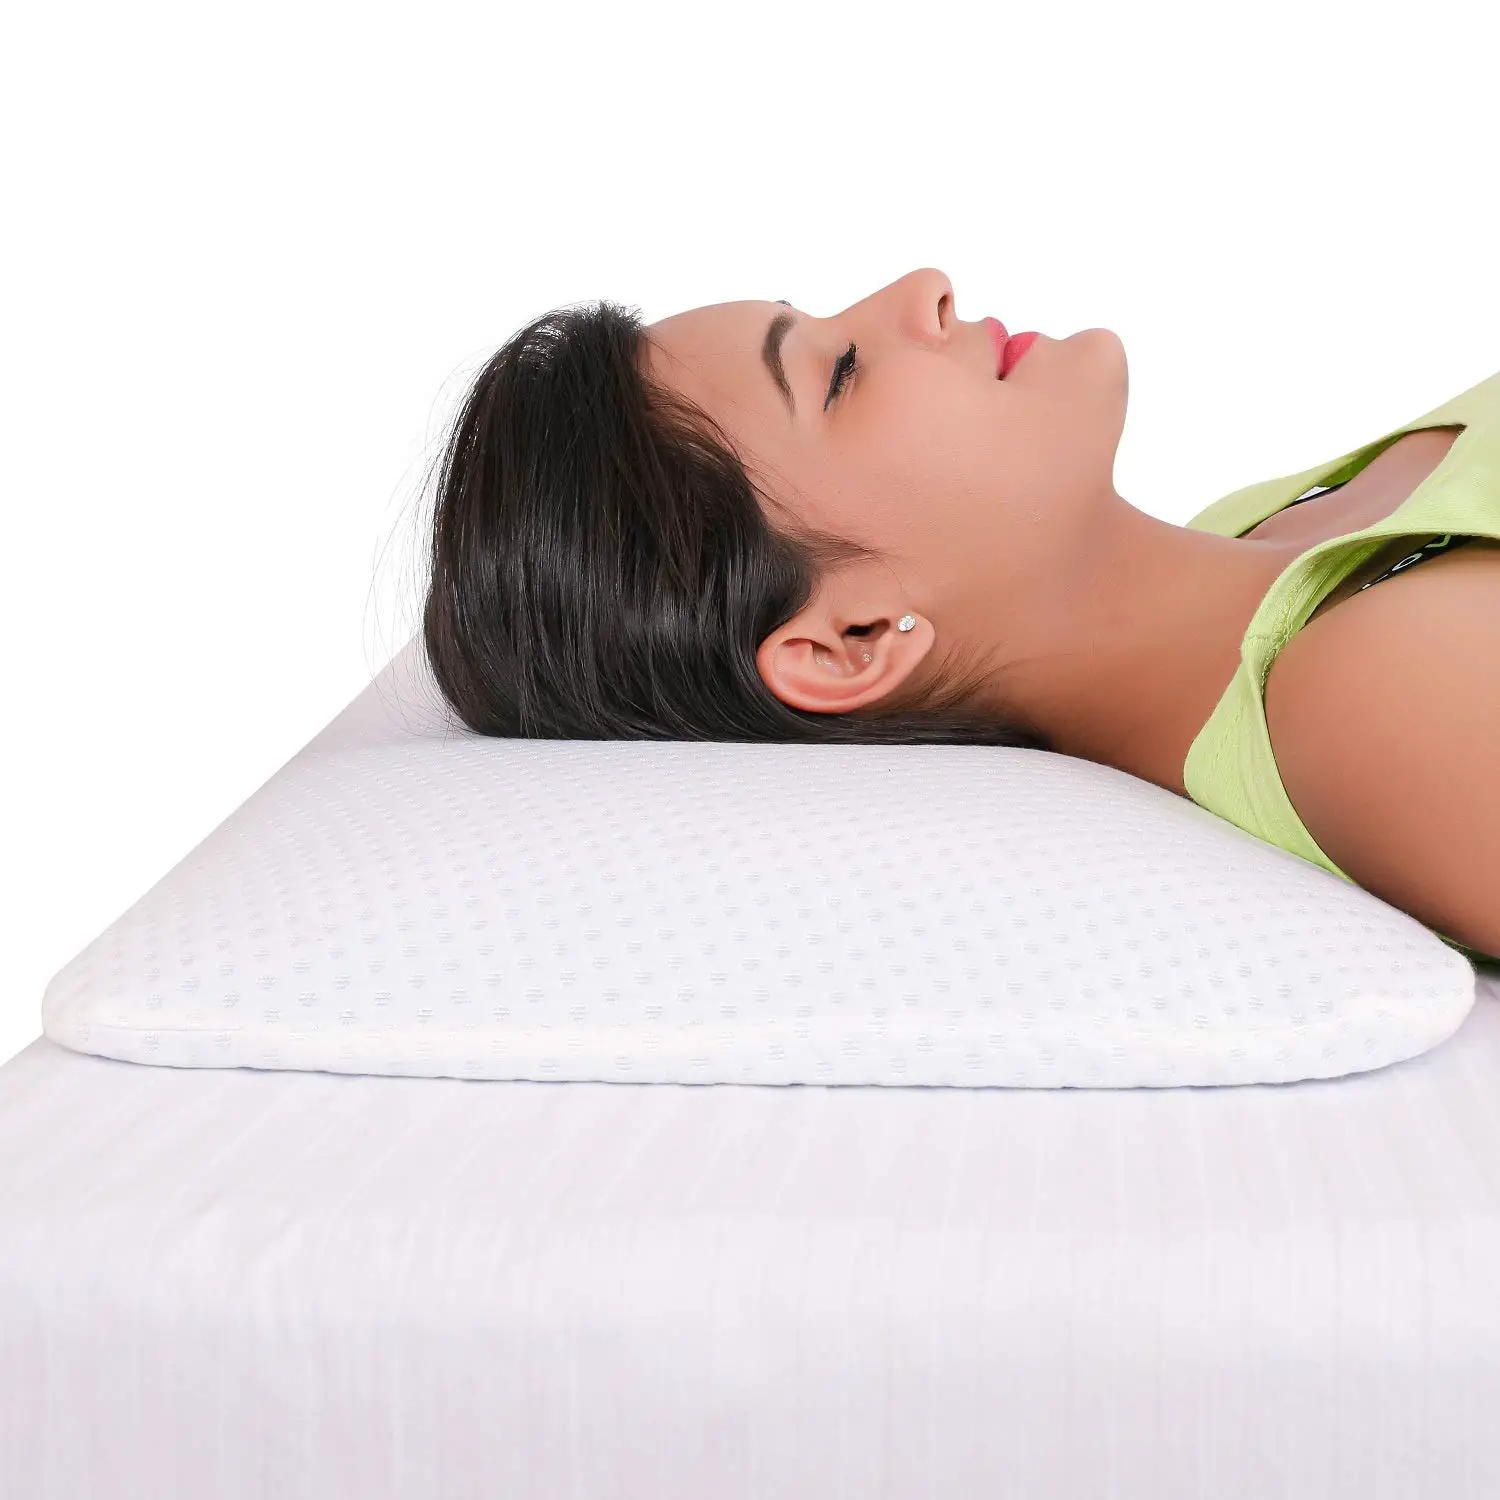 Metron Super Slim Cervical Pillow for Neck and Back Pain